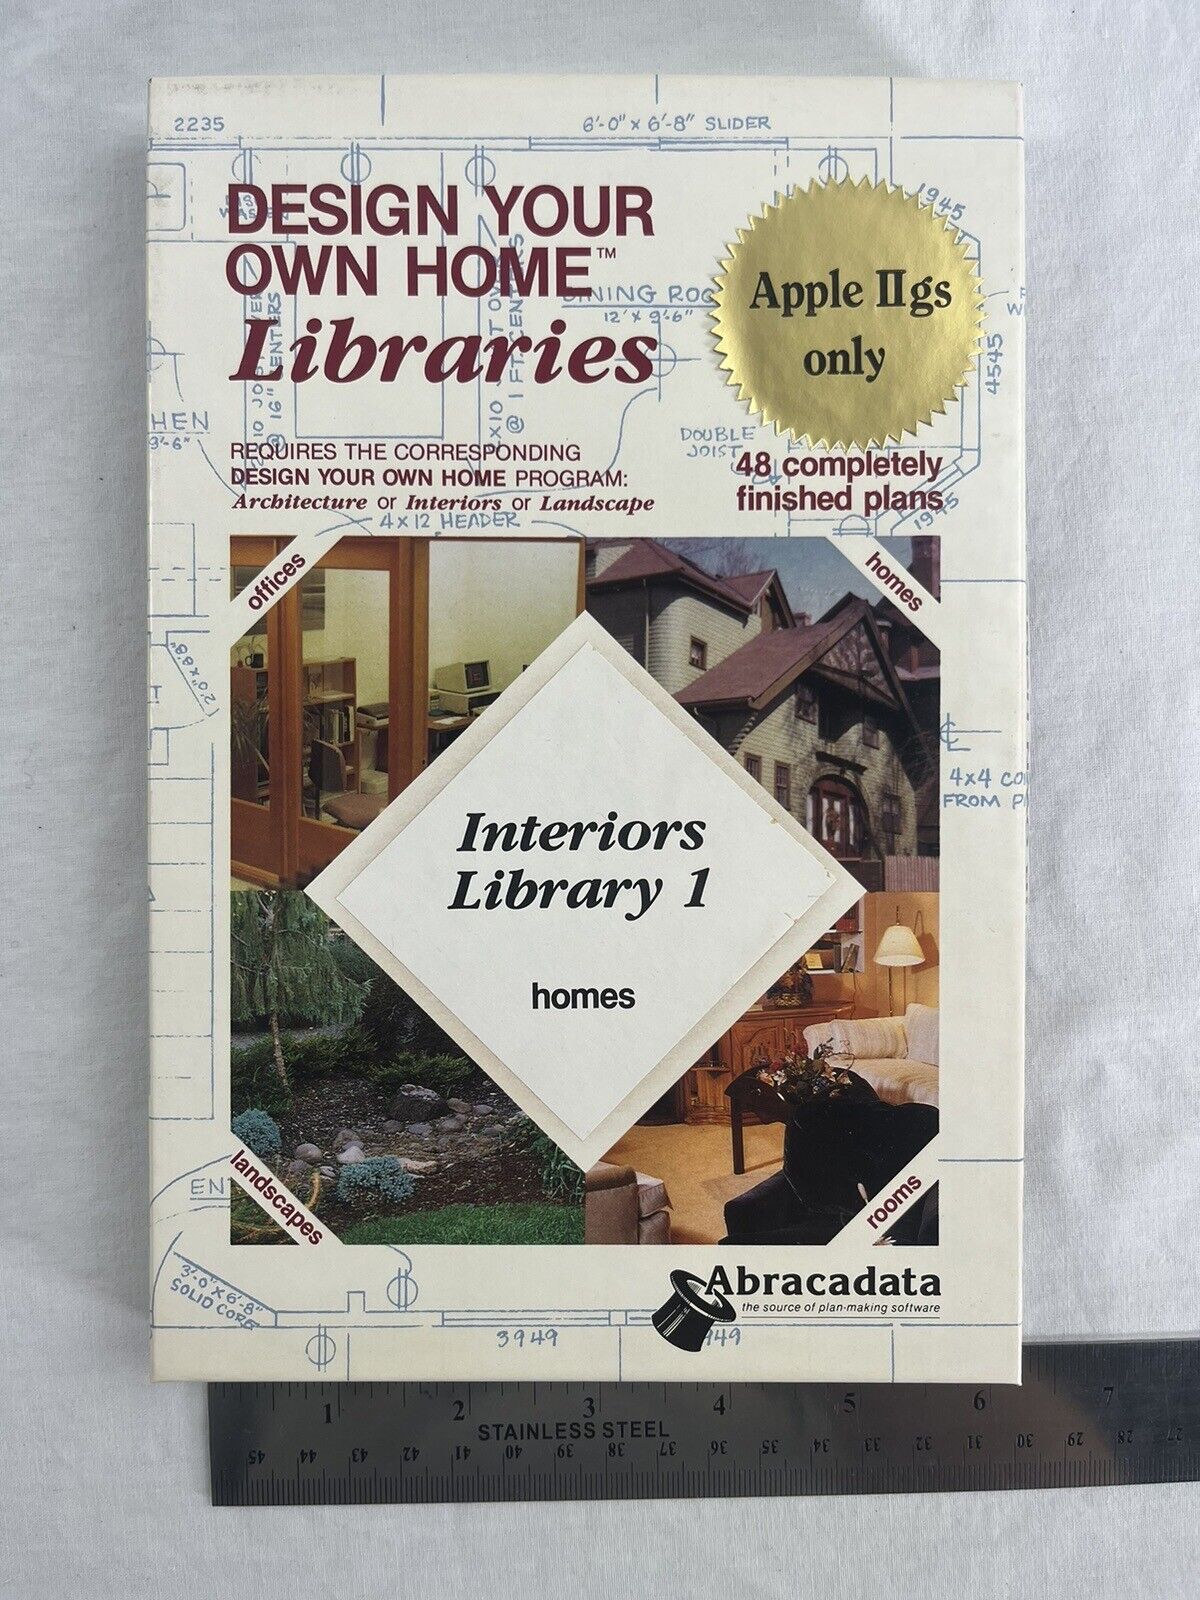 Design Your Own Home Interiors Library 1 Homes by Avant-Garde for Apple IIgs